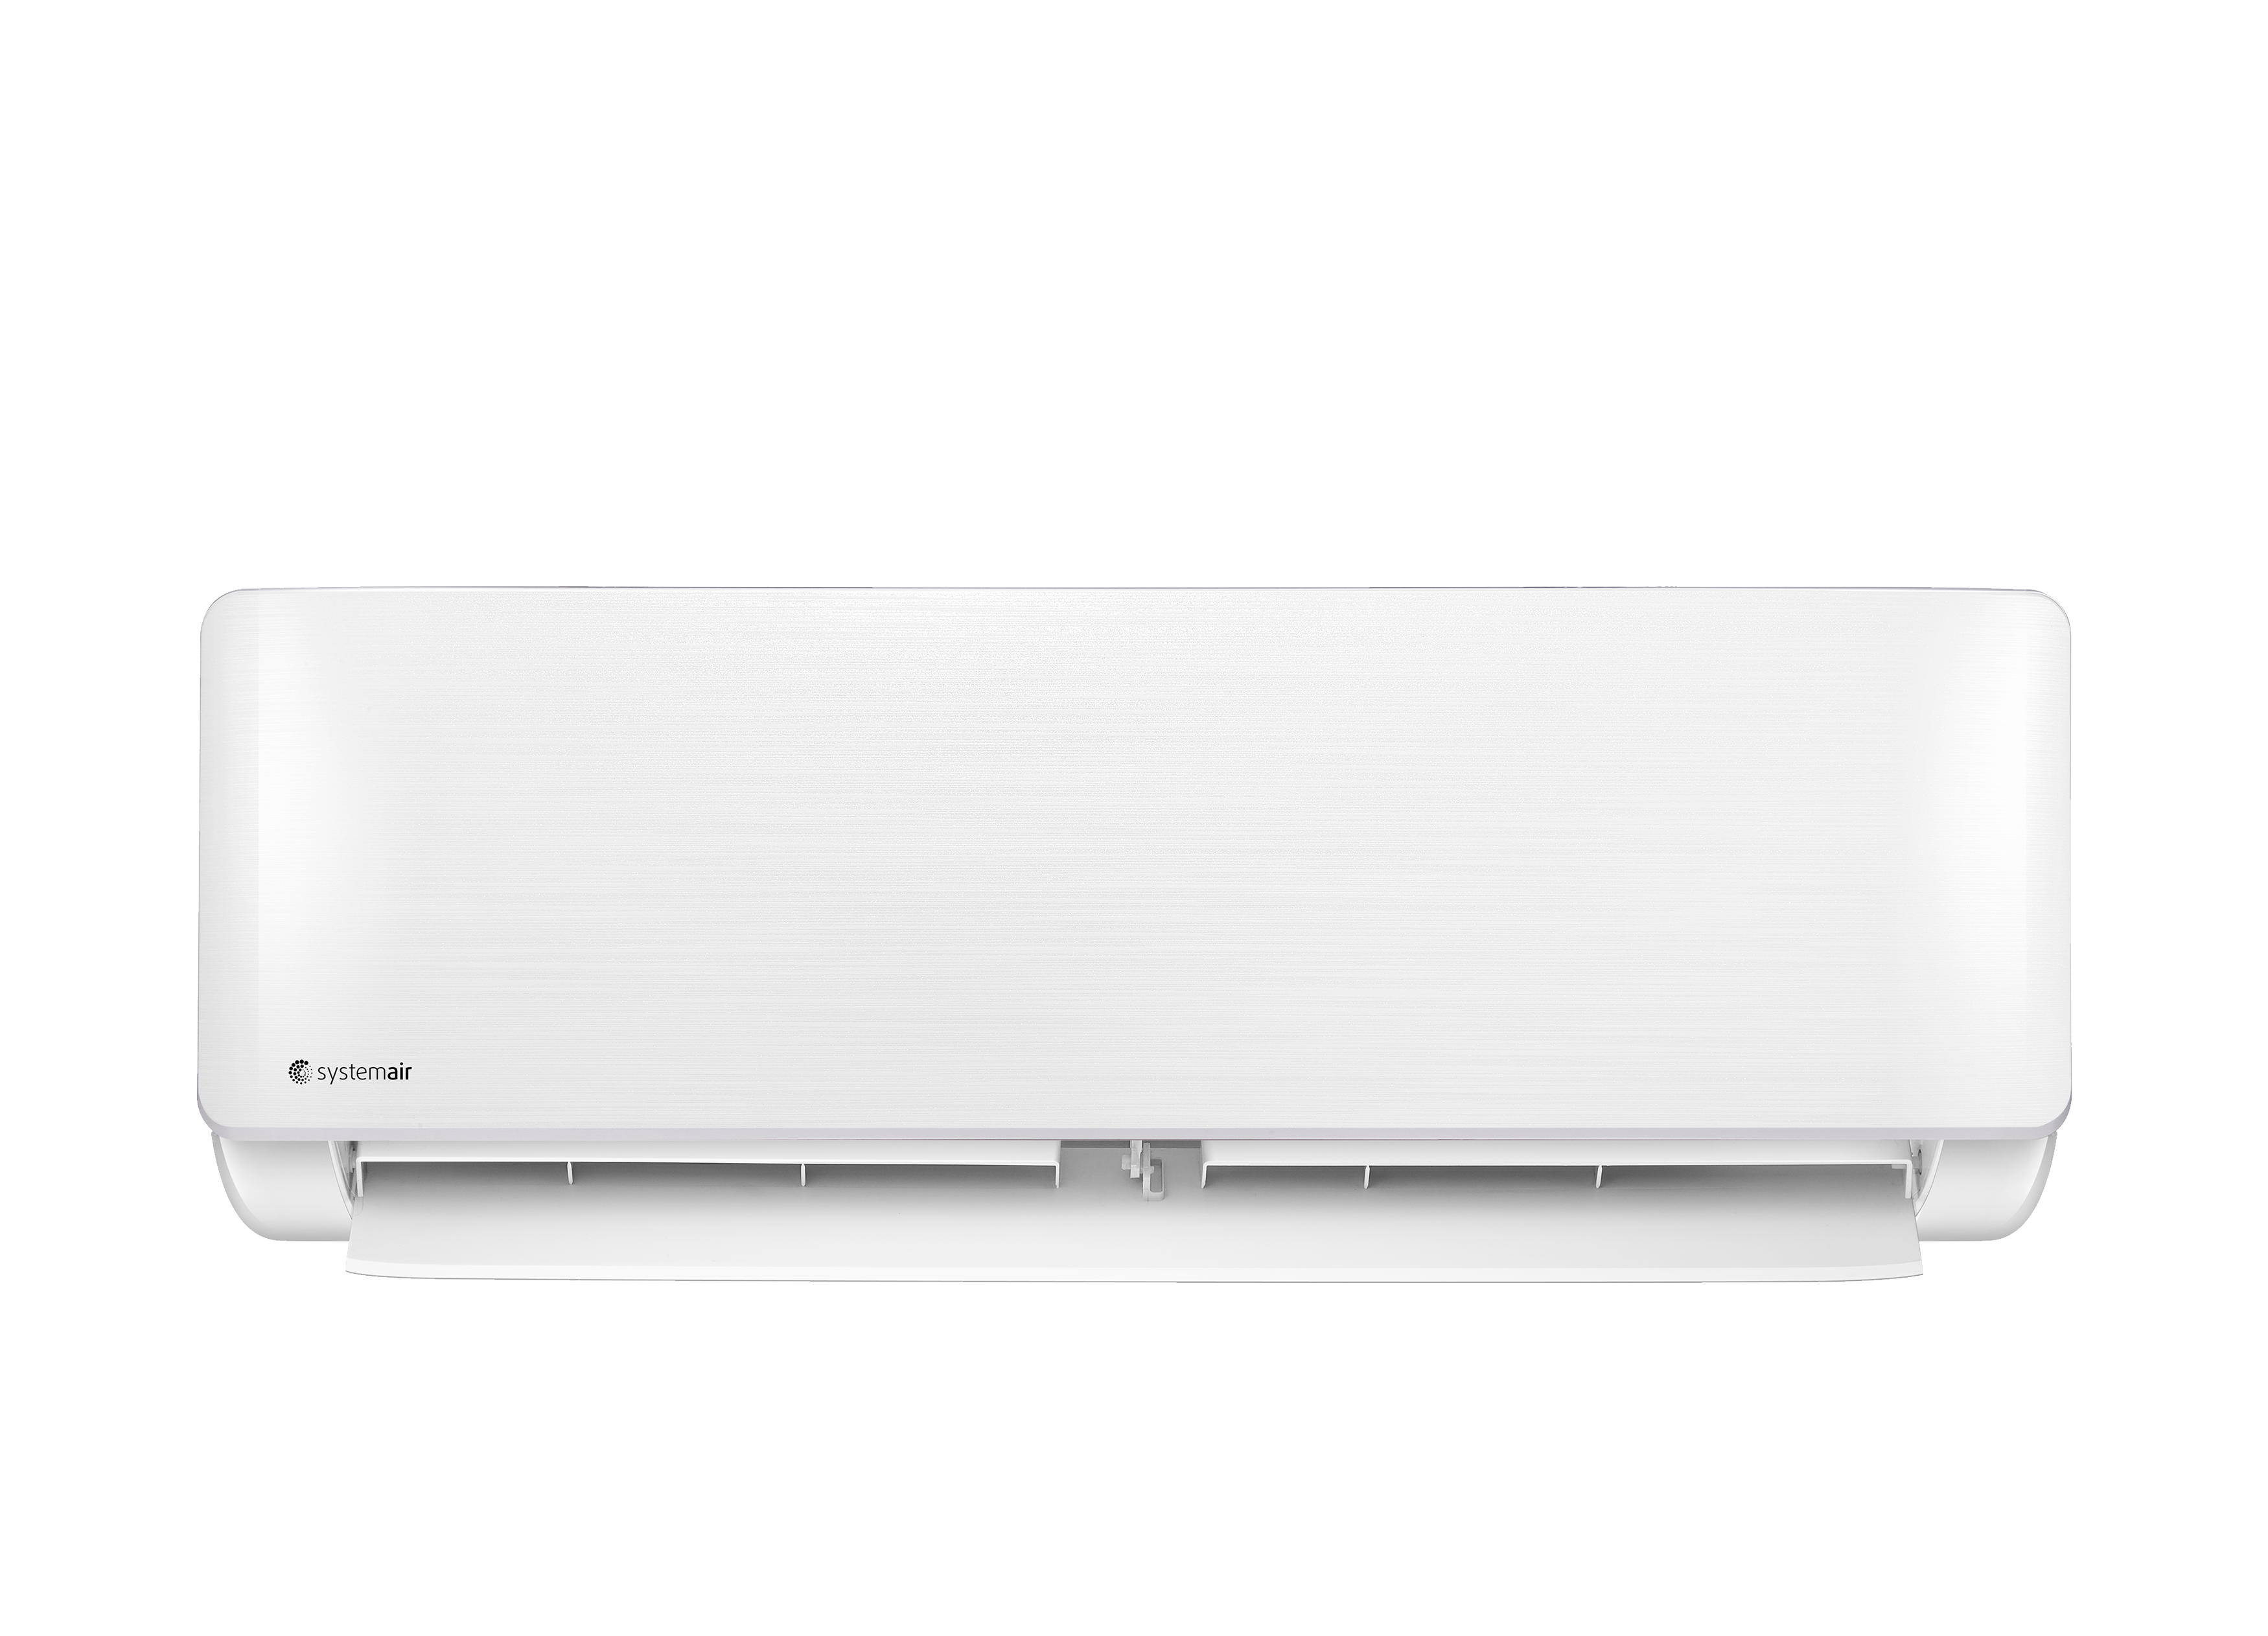 SYSPLIT WALL CUTE - Split Systems - Air Conditioners - Products - Systemair